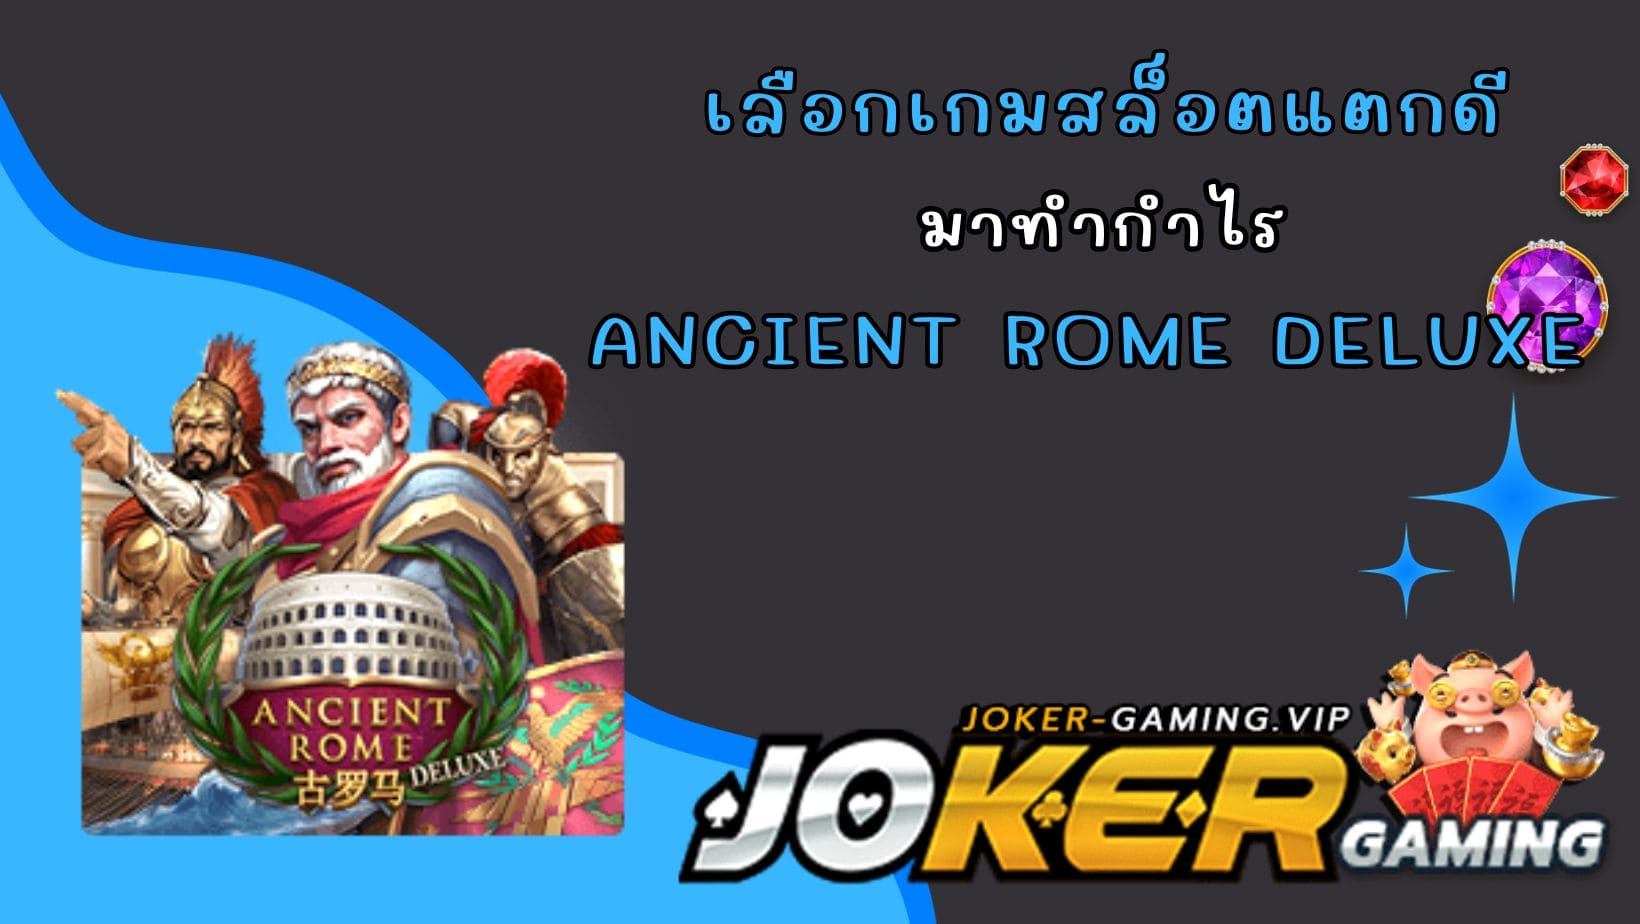 Ancient Rome Deluxe เลือกเกมสล็อตแตกดี